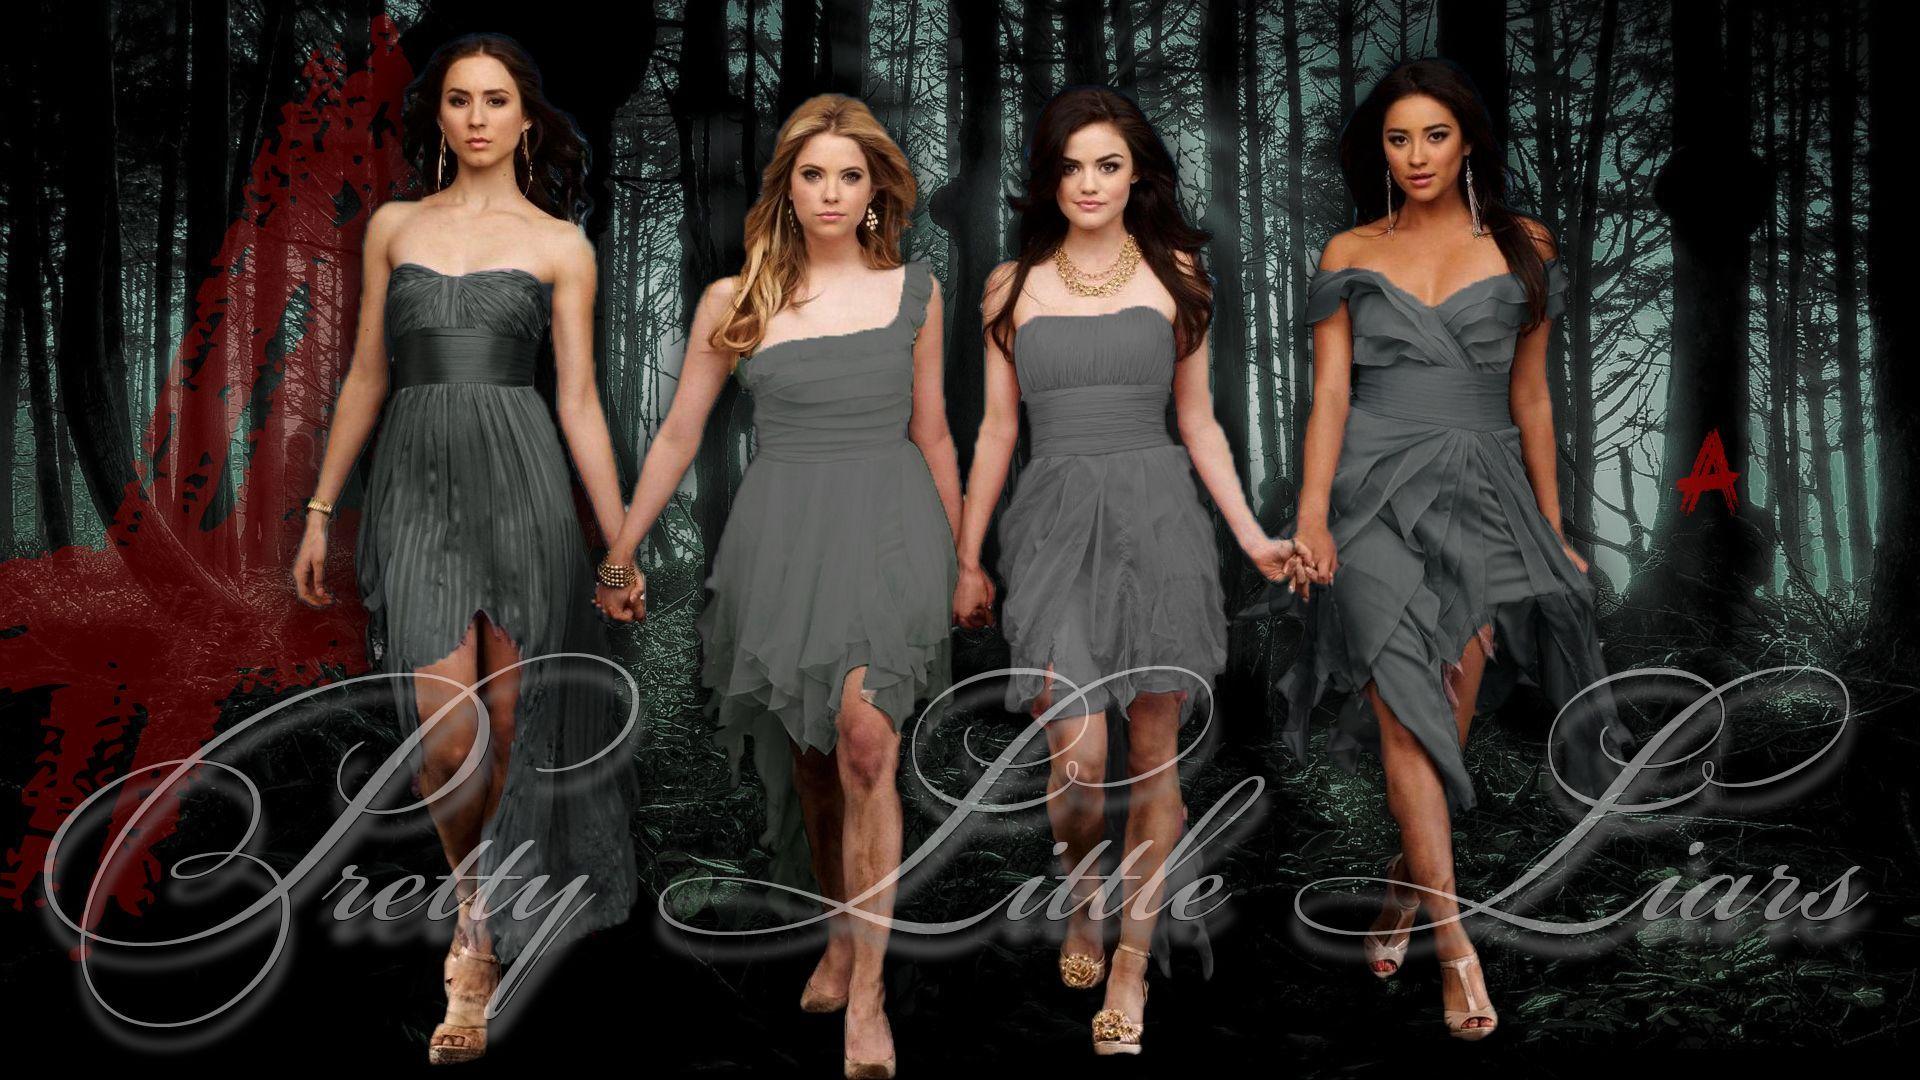 Pretty Little Liars Wallpaper High Resolution and Quality Download